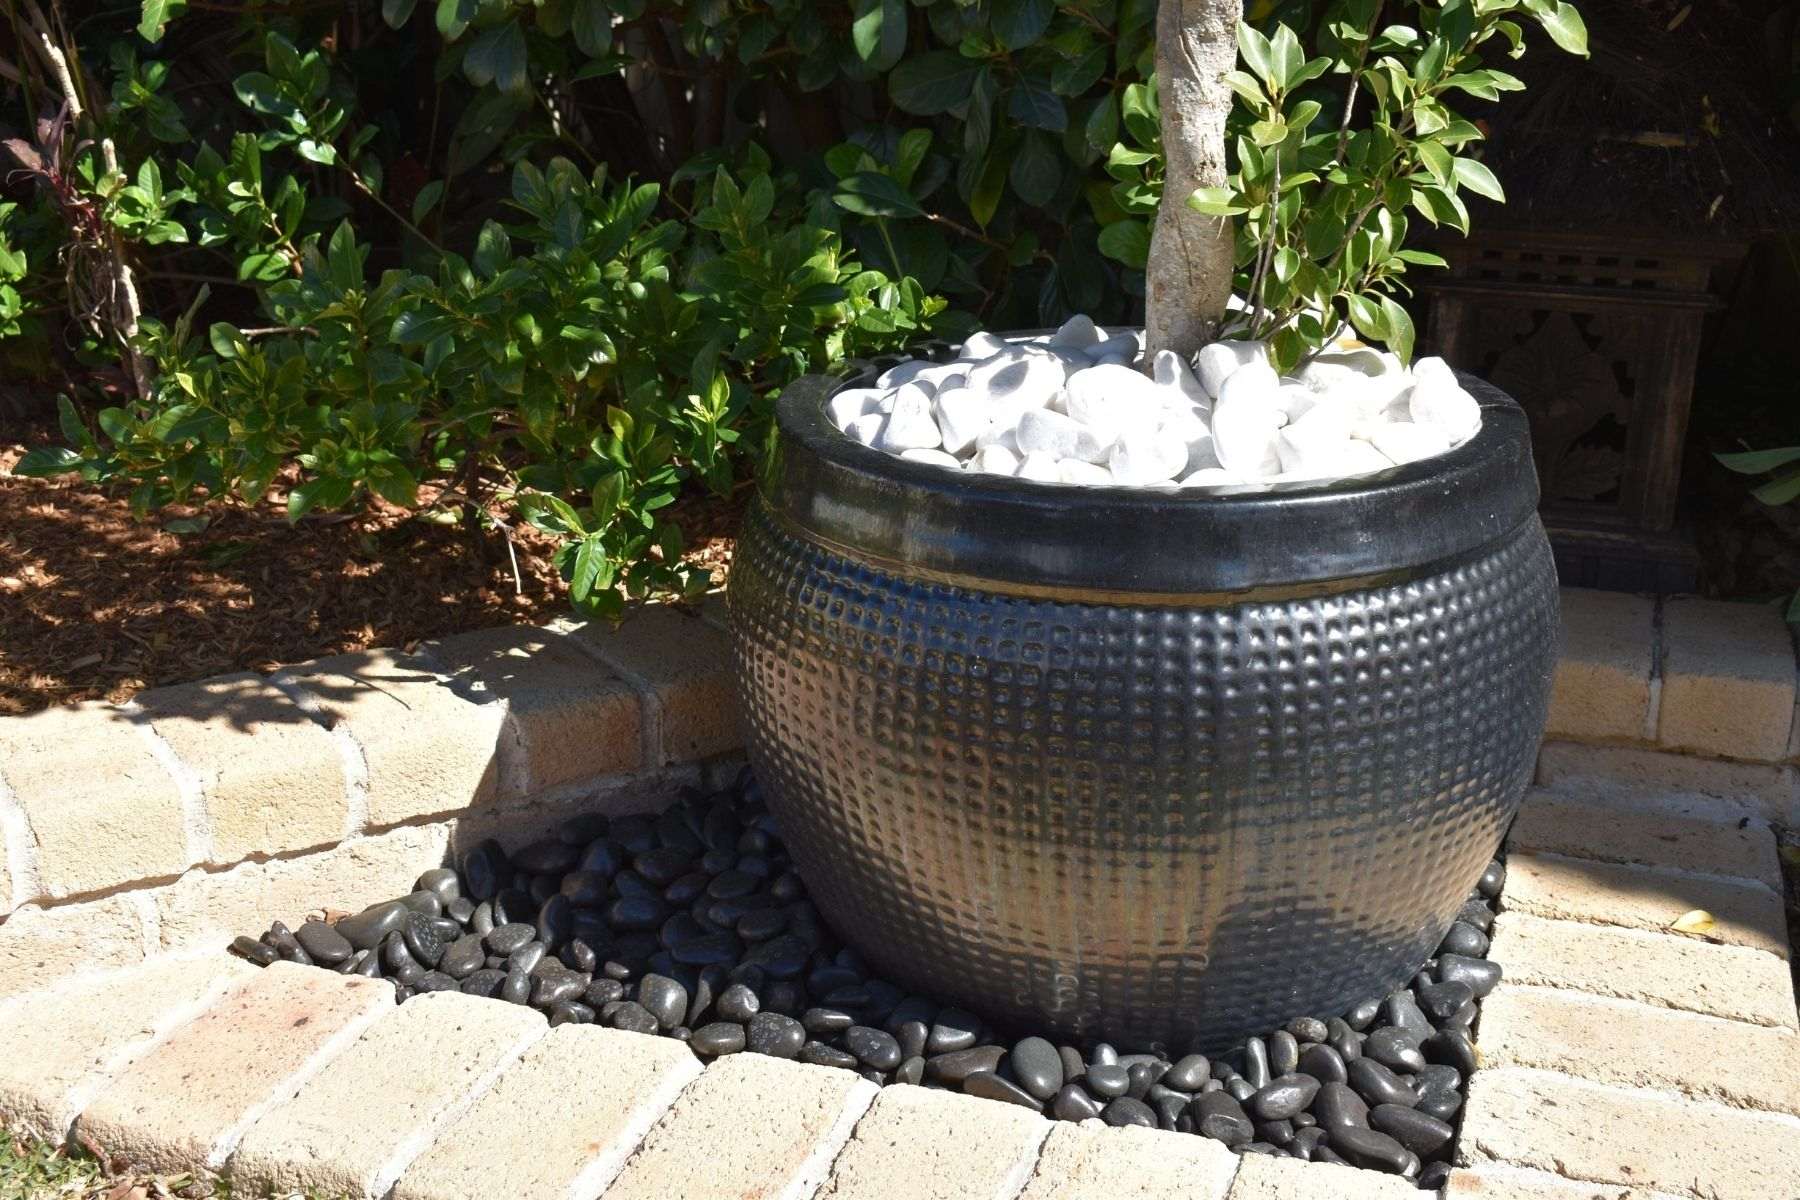 black garden pot decorated with white pebbles and black pebbles underneath